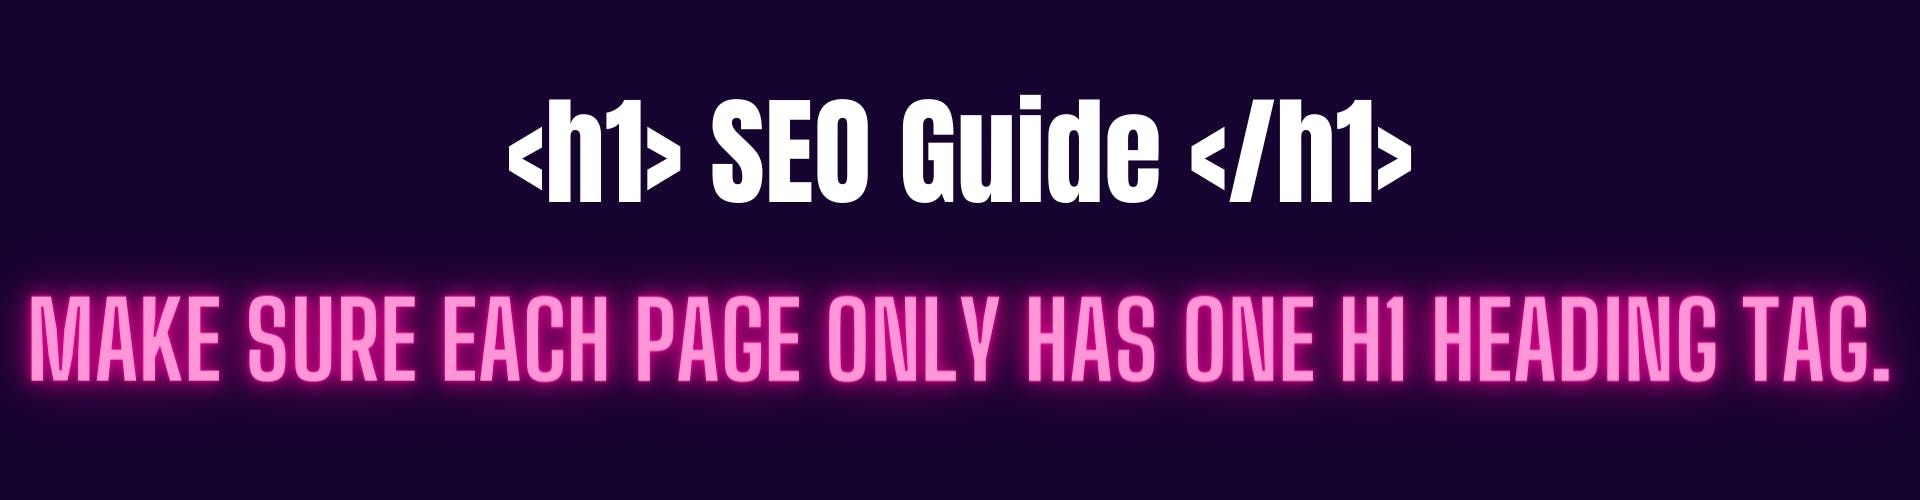 h1-tag-in-seo